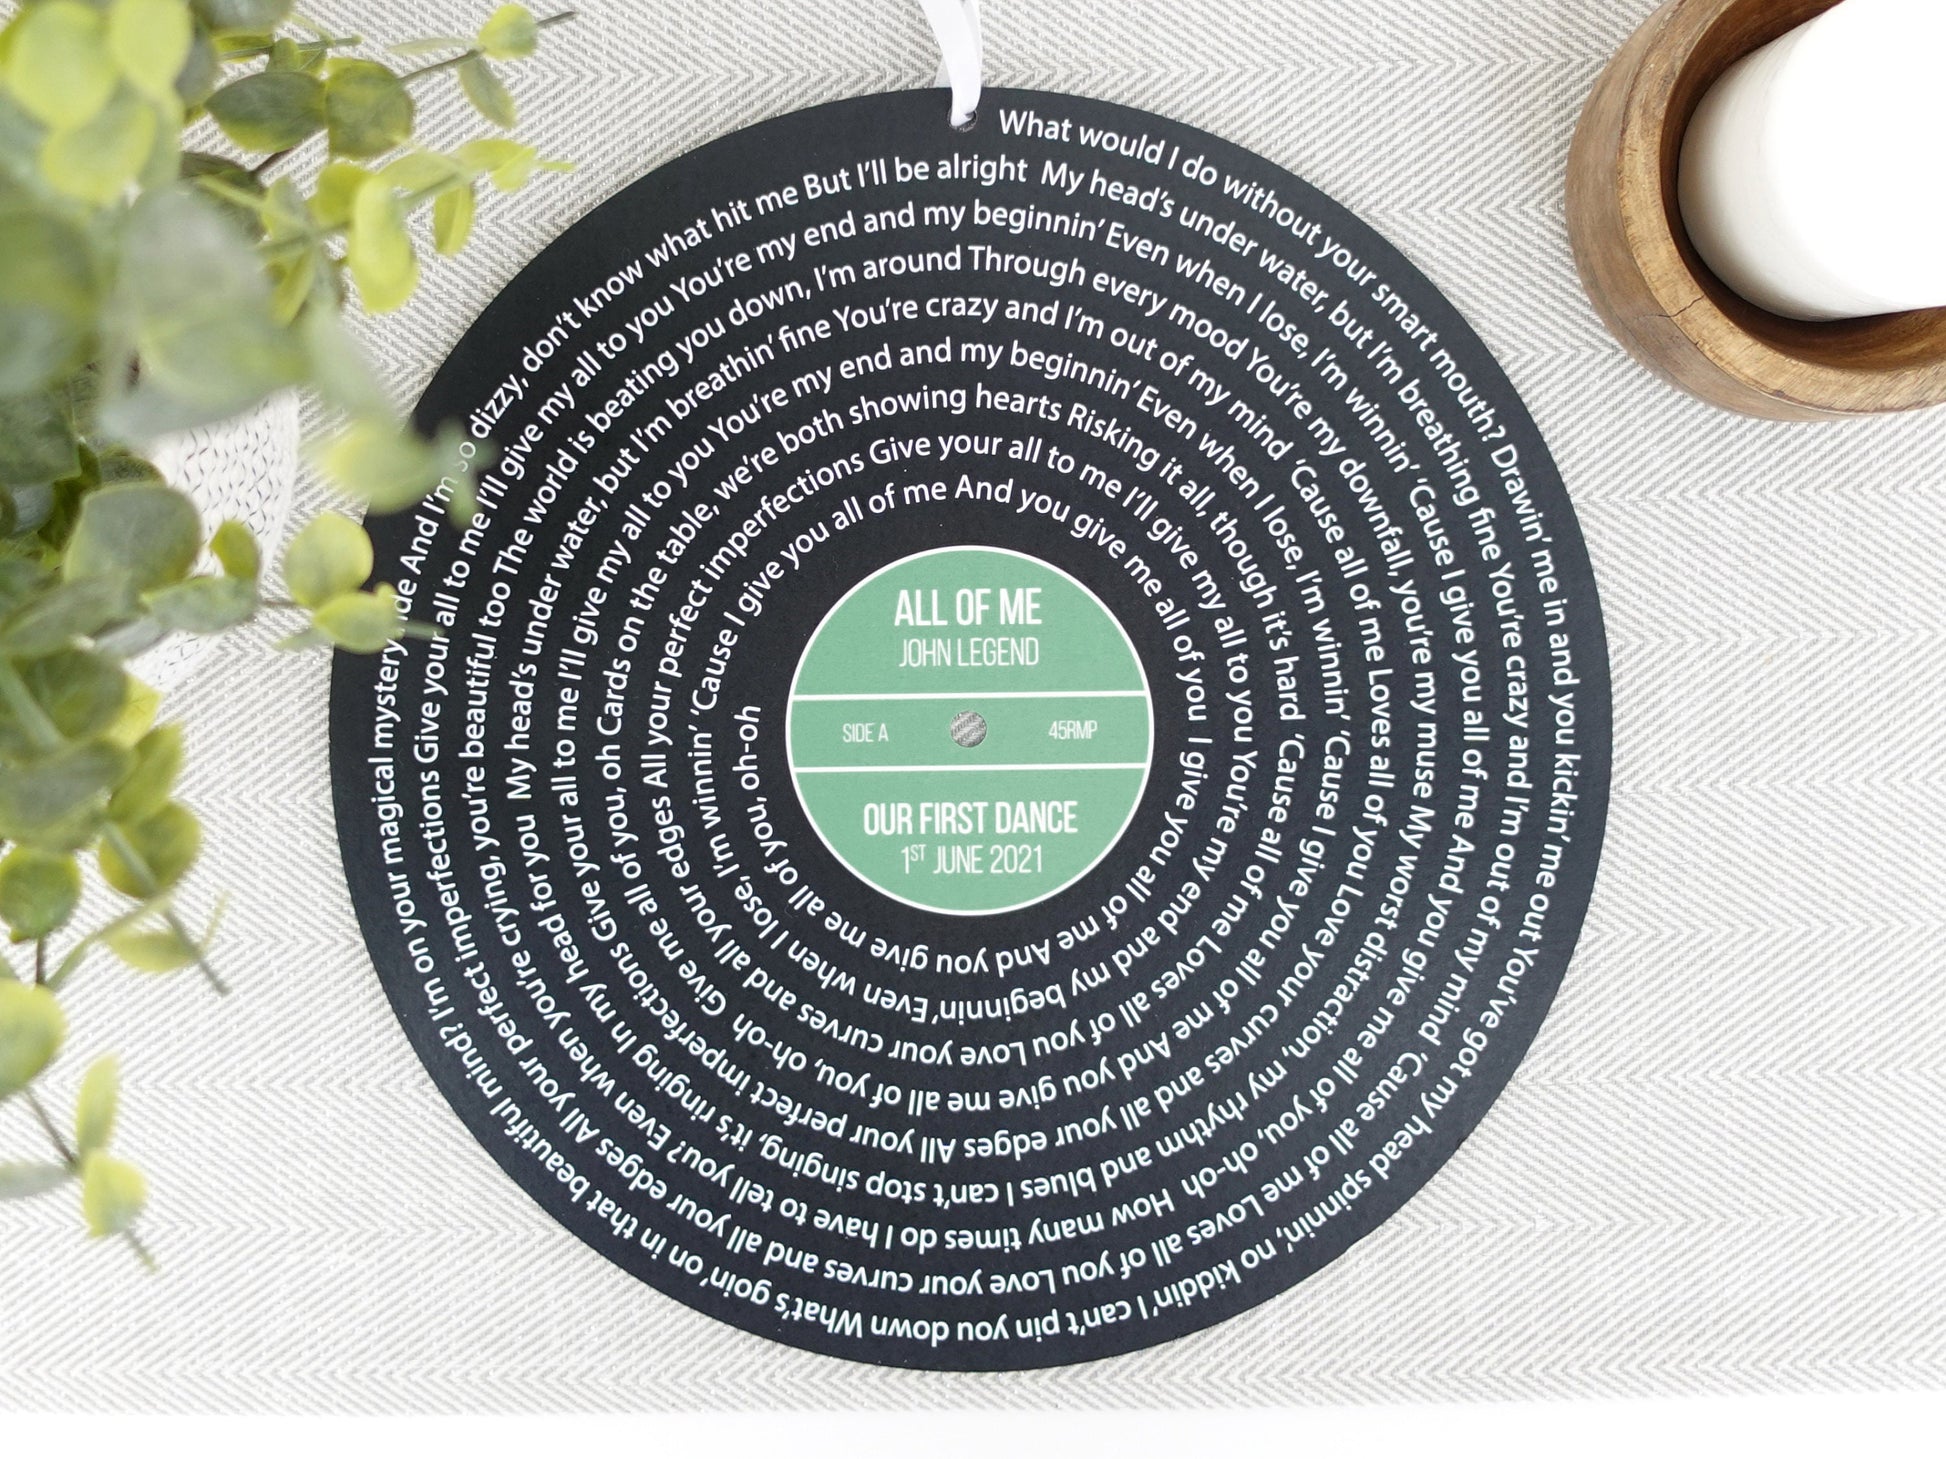 Vinyl record song lyrics disk / Personalised wooden wall hanging / Valentines day gift / Wedding anniversary present / First Dance